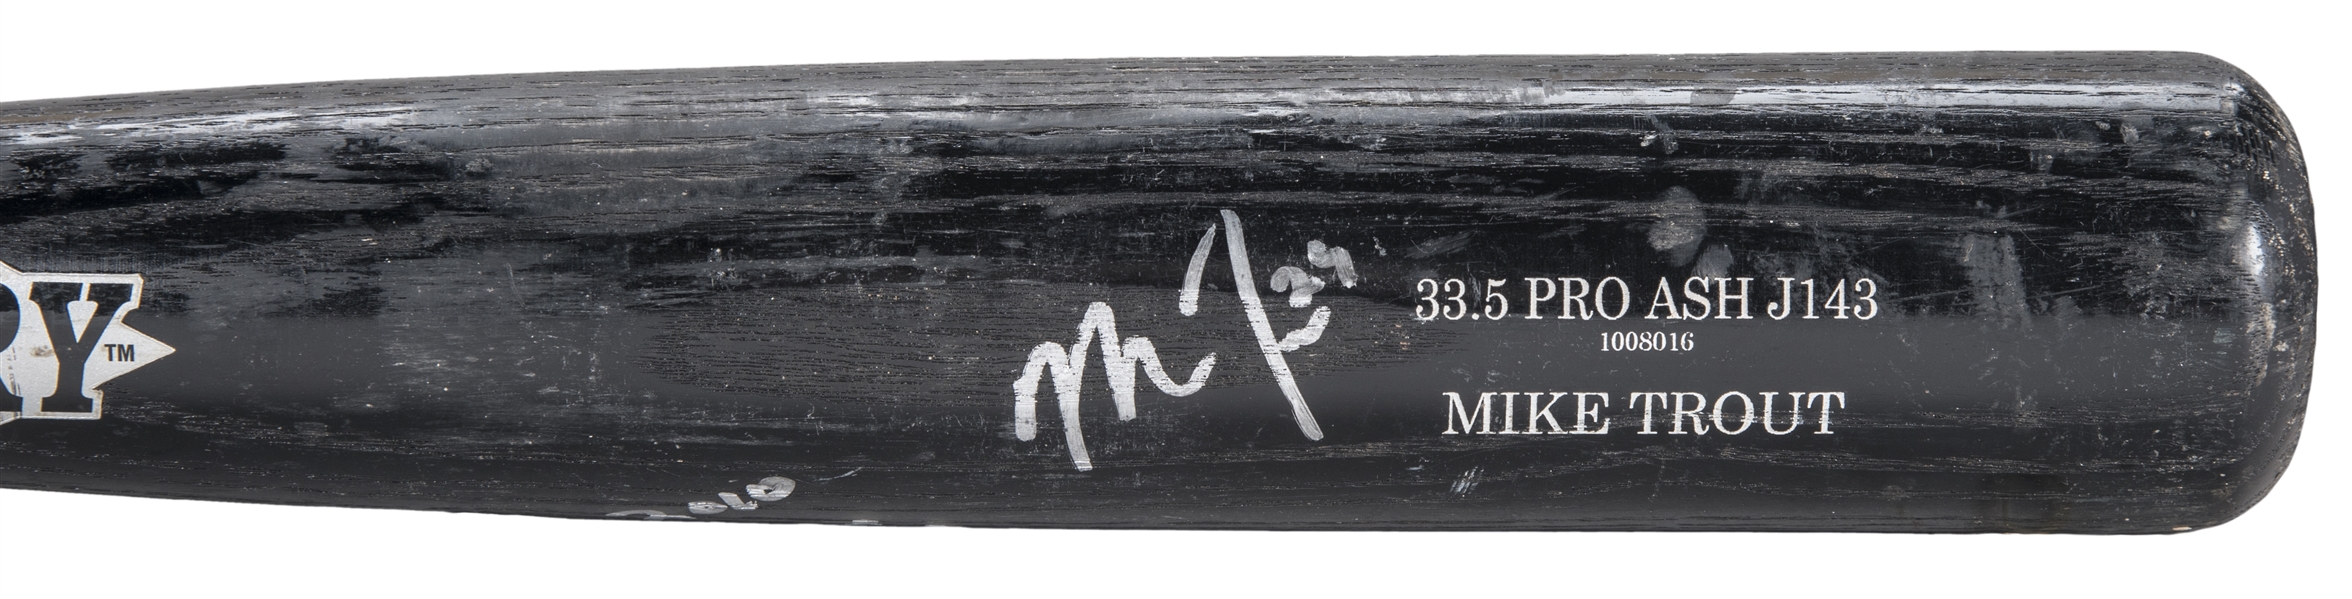 Mike Trout Signed & Game Used Pre-Rookie 2010 Baseball Bat - One of the Earliest Known Trout Gamers! (Anderson Authentics & PSA/DNA)